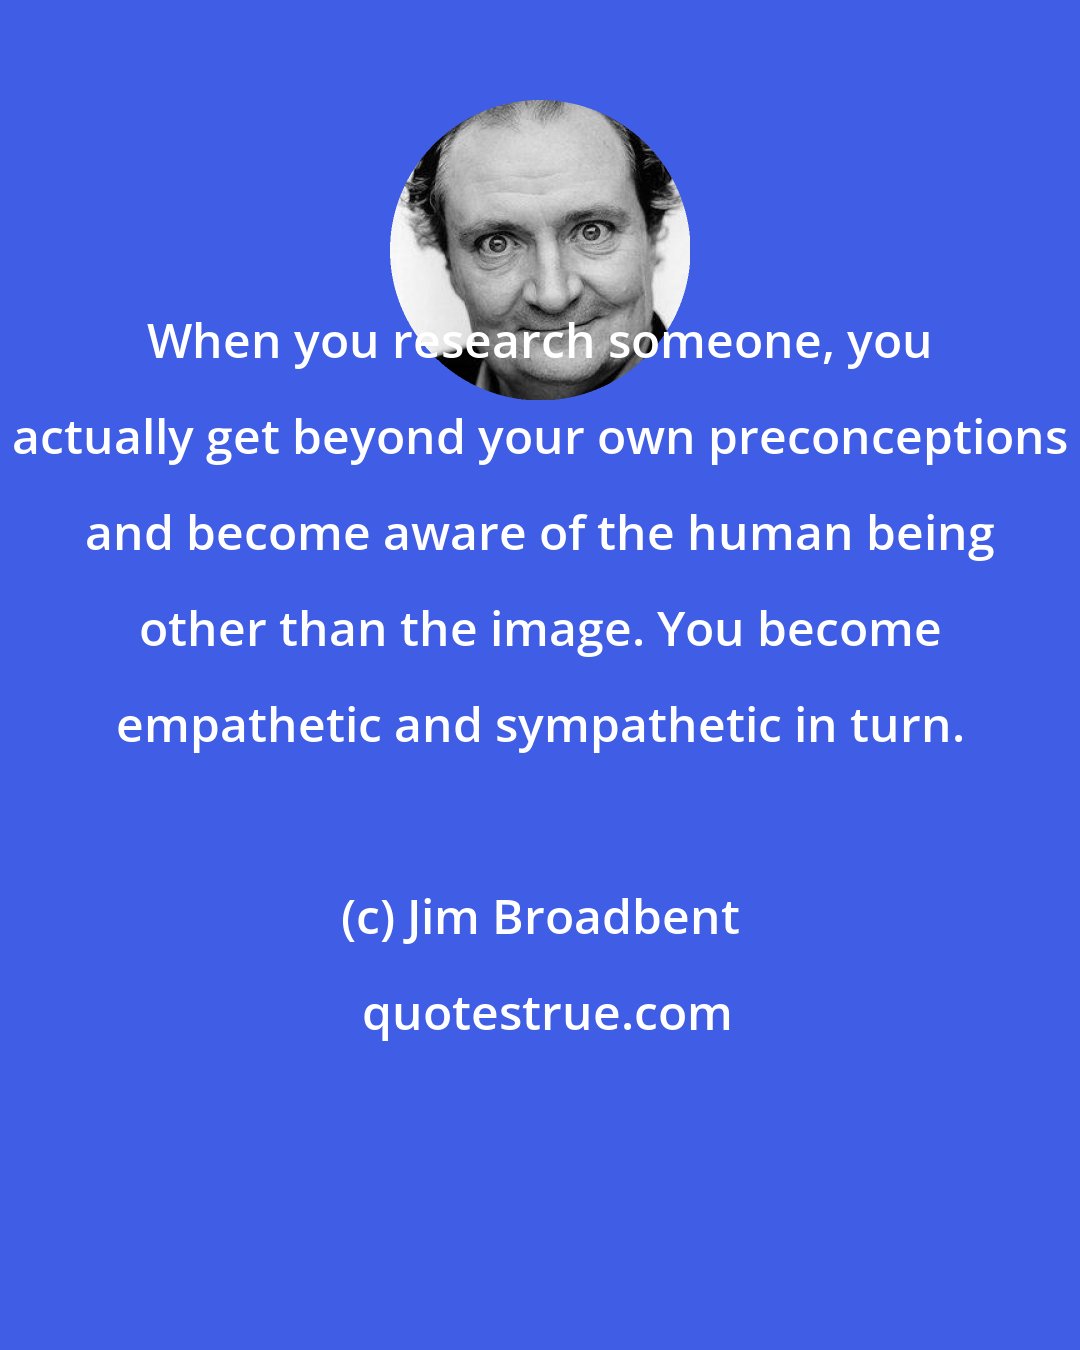 Jim Broadbent: When you research someone, you actually get beyond your own preconceptions and become aware of the human being other than the image. You become empathetic and sympathetic in turn.